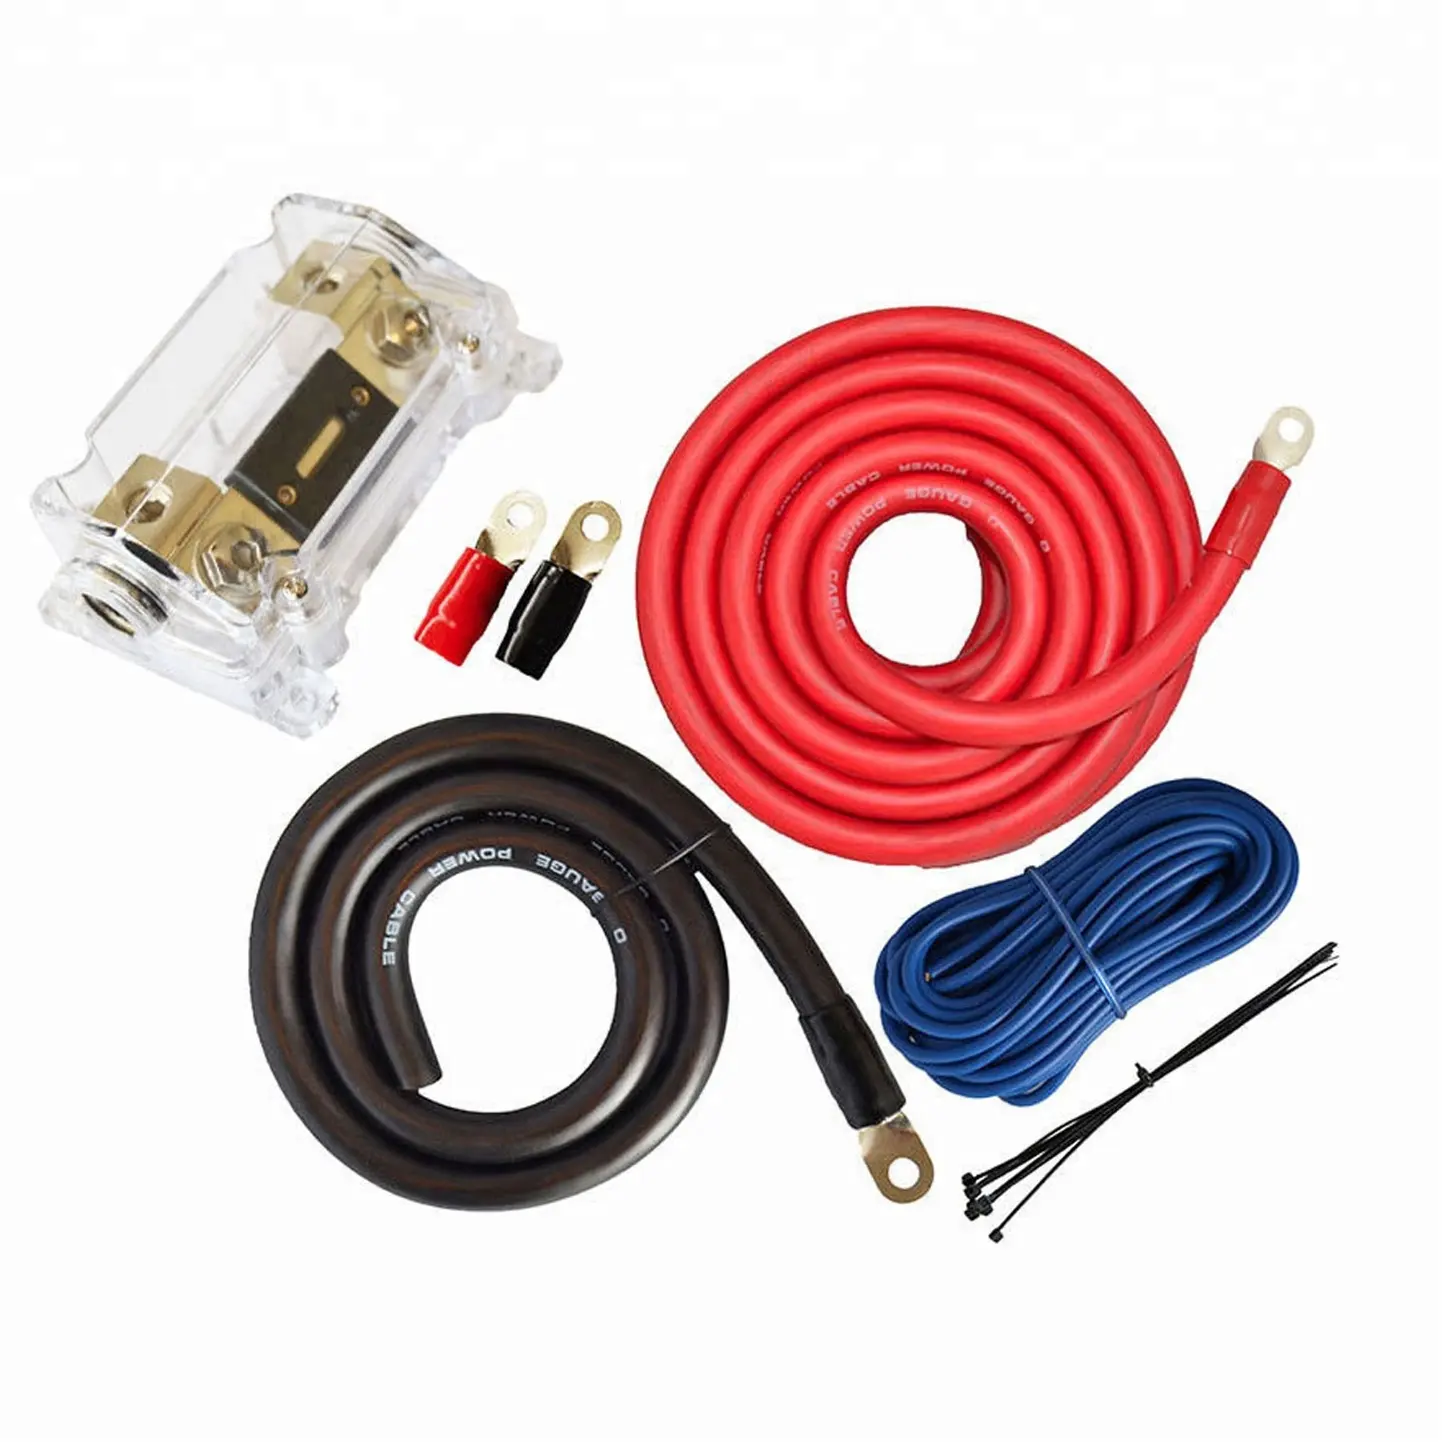 Complete Wiring Kit for Amplifier Installation 4 Gauge 1250W Installation Wire and Wiring Kits